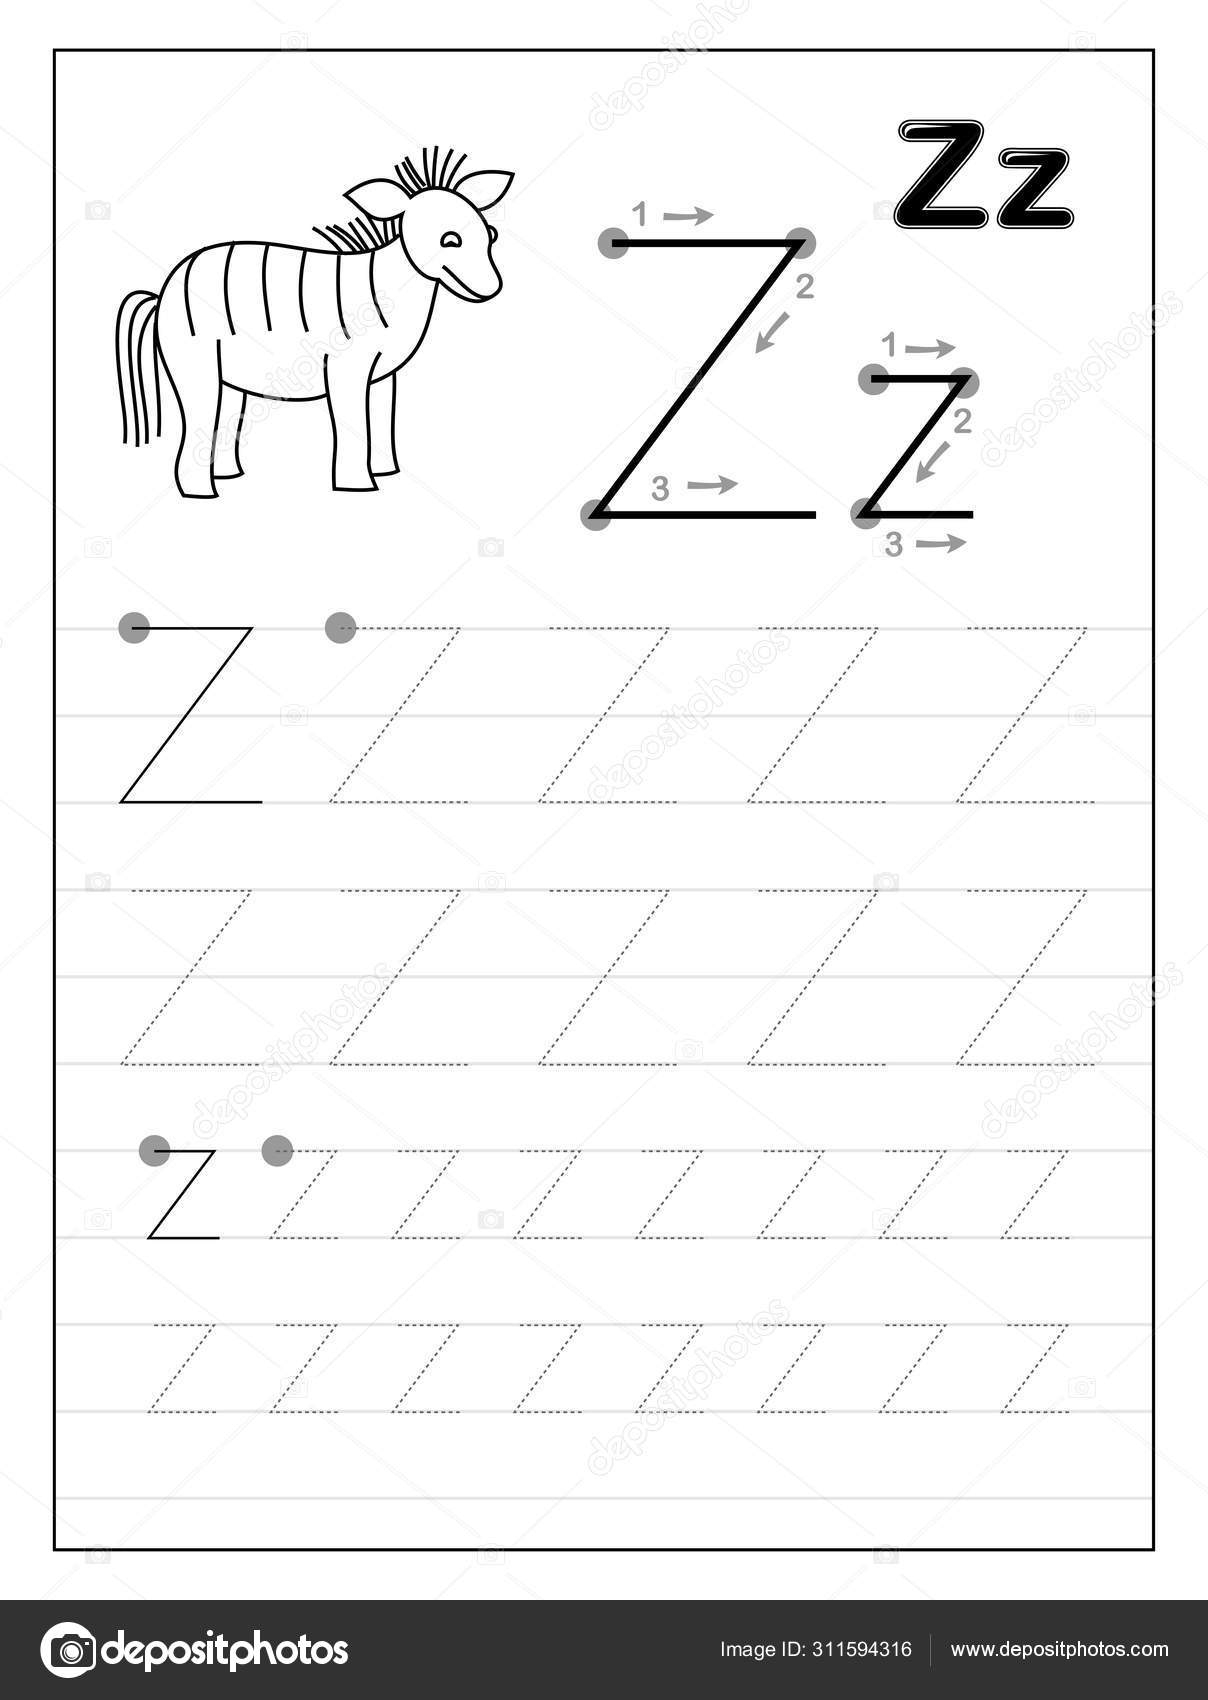 Tracing Alphabet Letter Z. Black And White Educational Pages On Line For Kids. Printable Worksheet For Children Textbook. Developing Skills Of